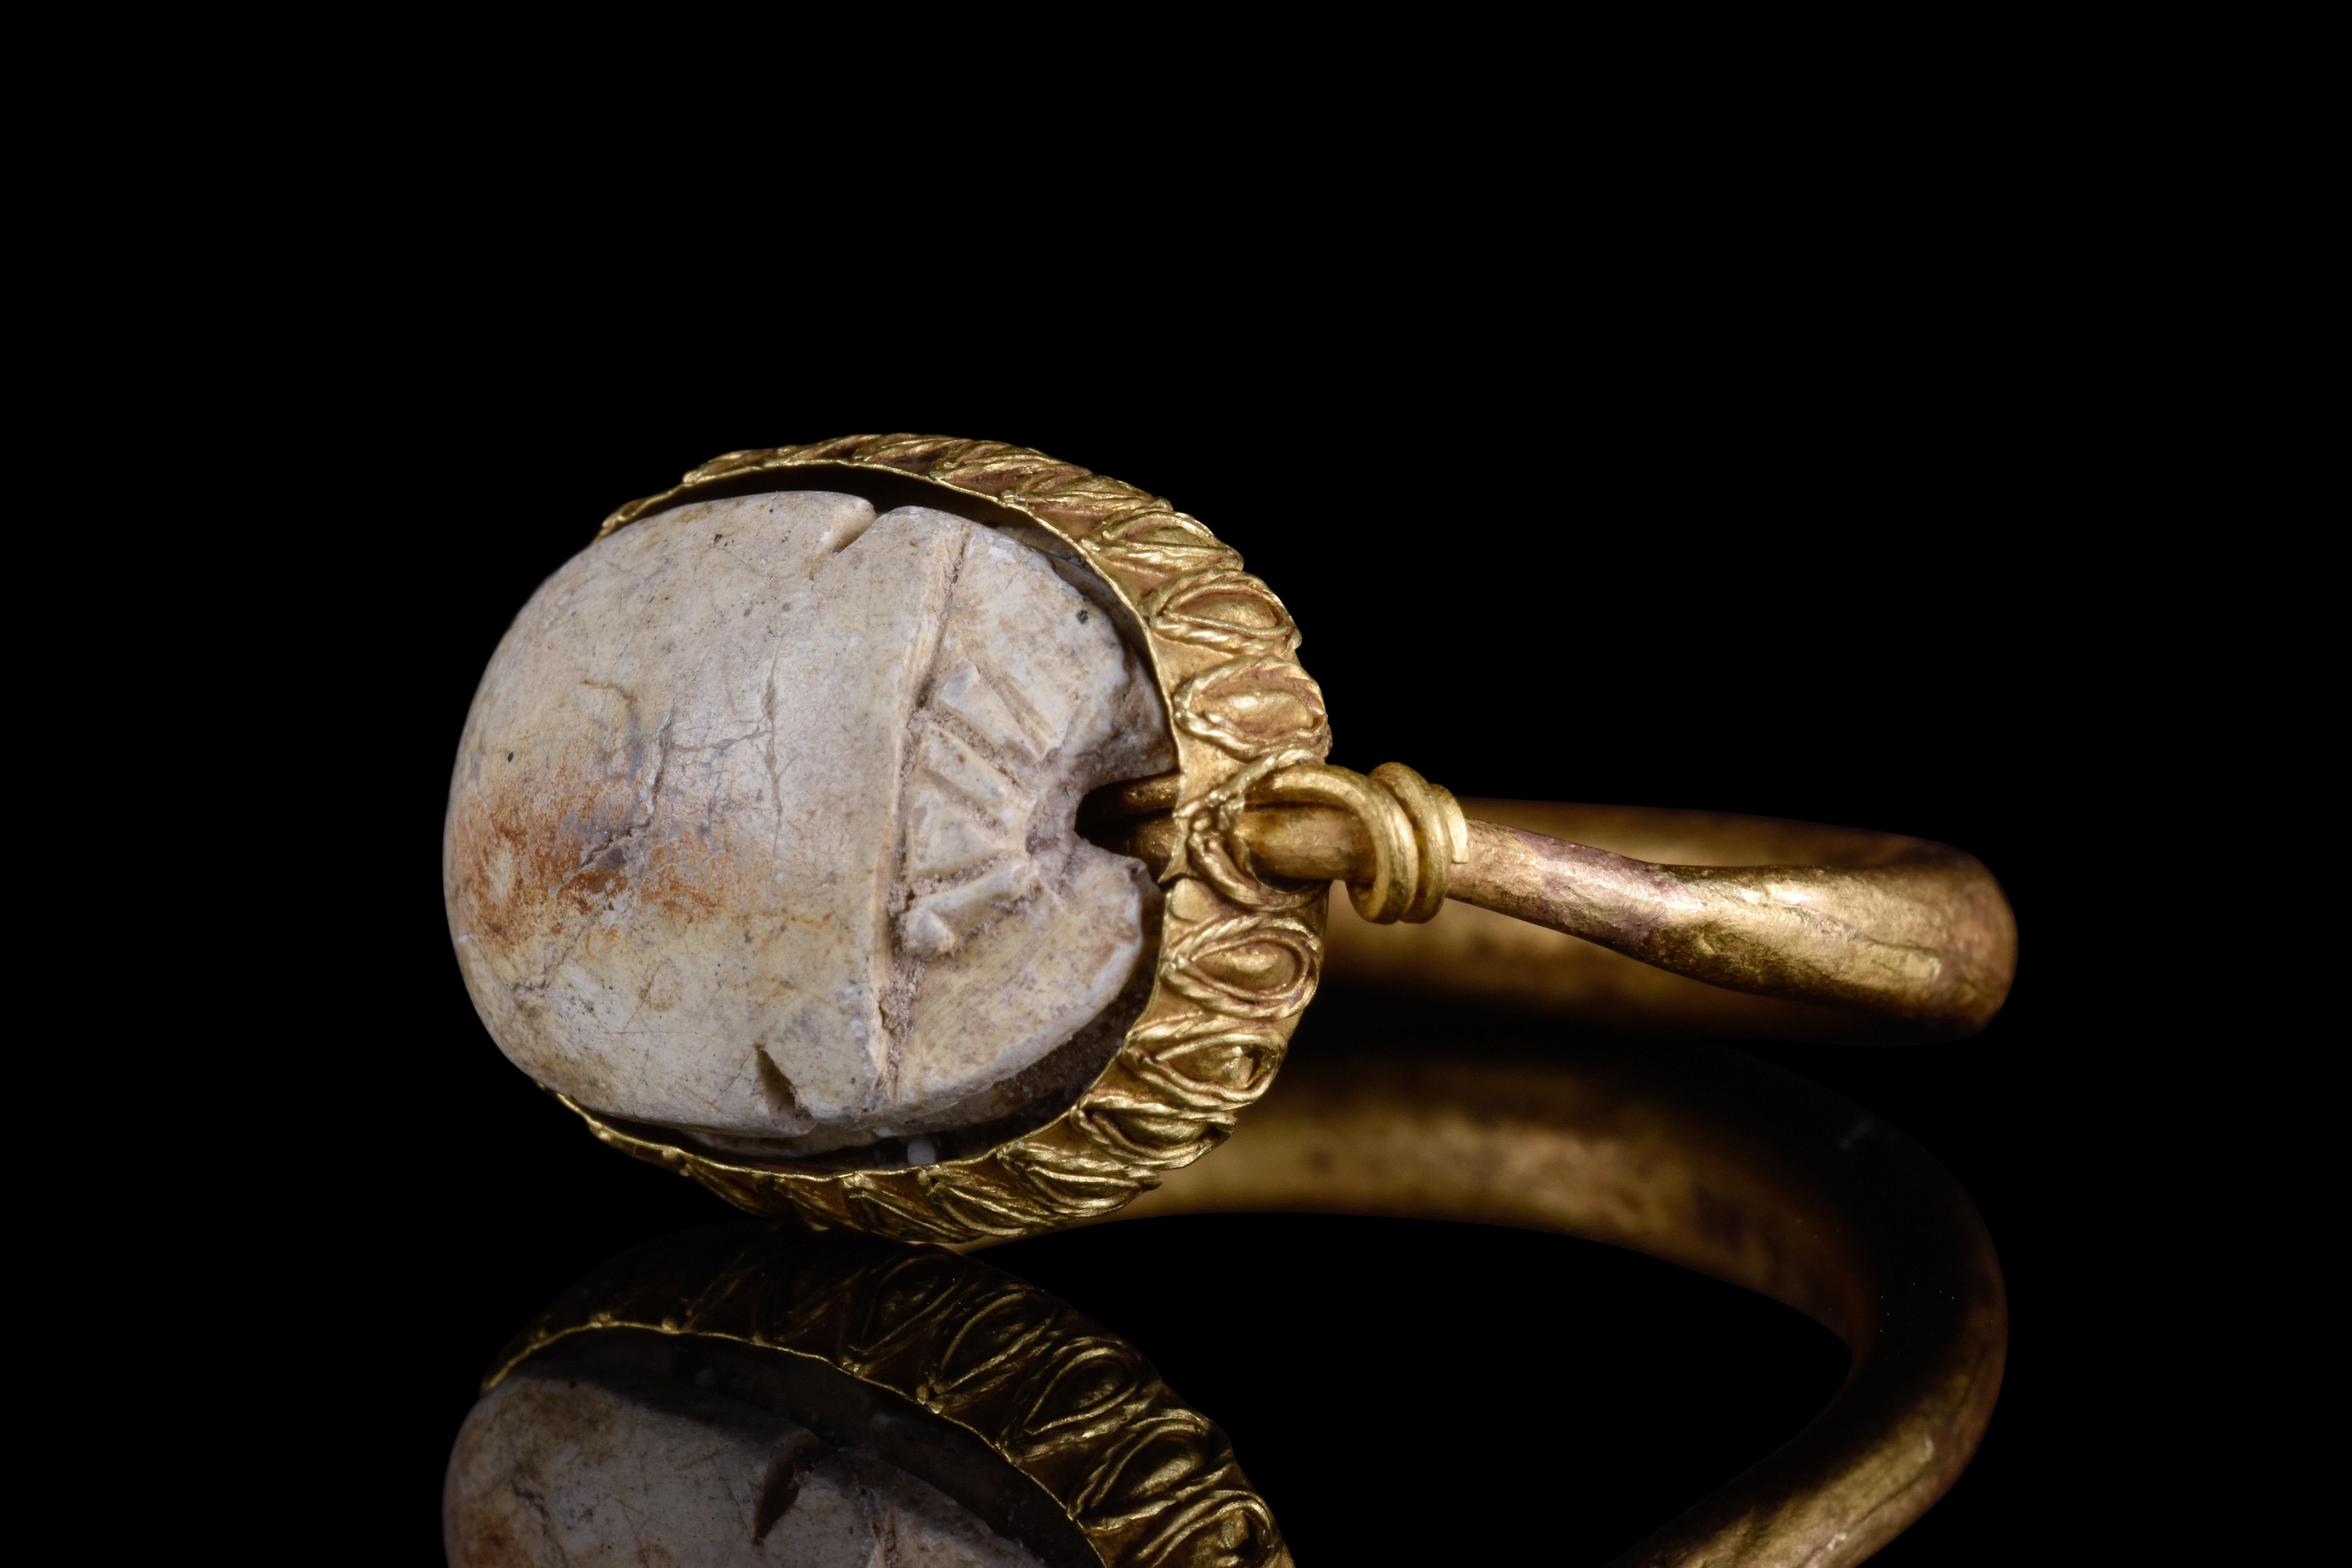 An Egyptian steatite scarab encased in a possibly later, high-karat gold swivel ring. The scarab is a symbol of rebirth and protection and is decorated with six sacred serpents, representing divine authority. The ring has a simple D-shaped design